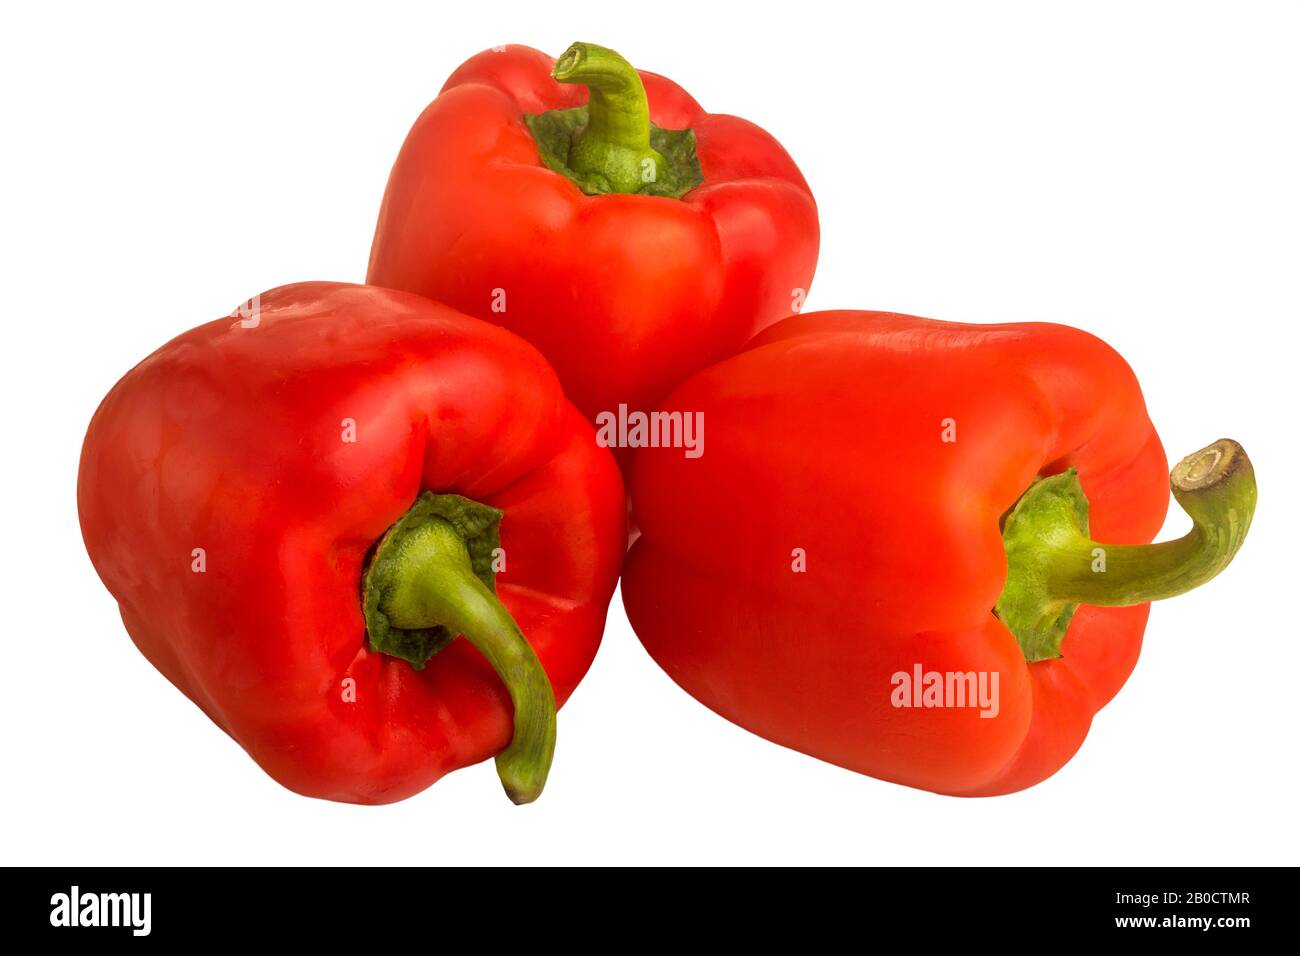 image of three red bell peppers on a white background Stock Photo